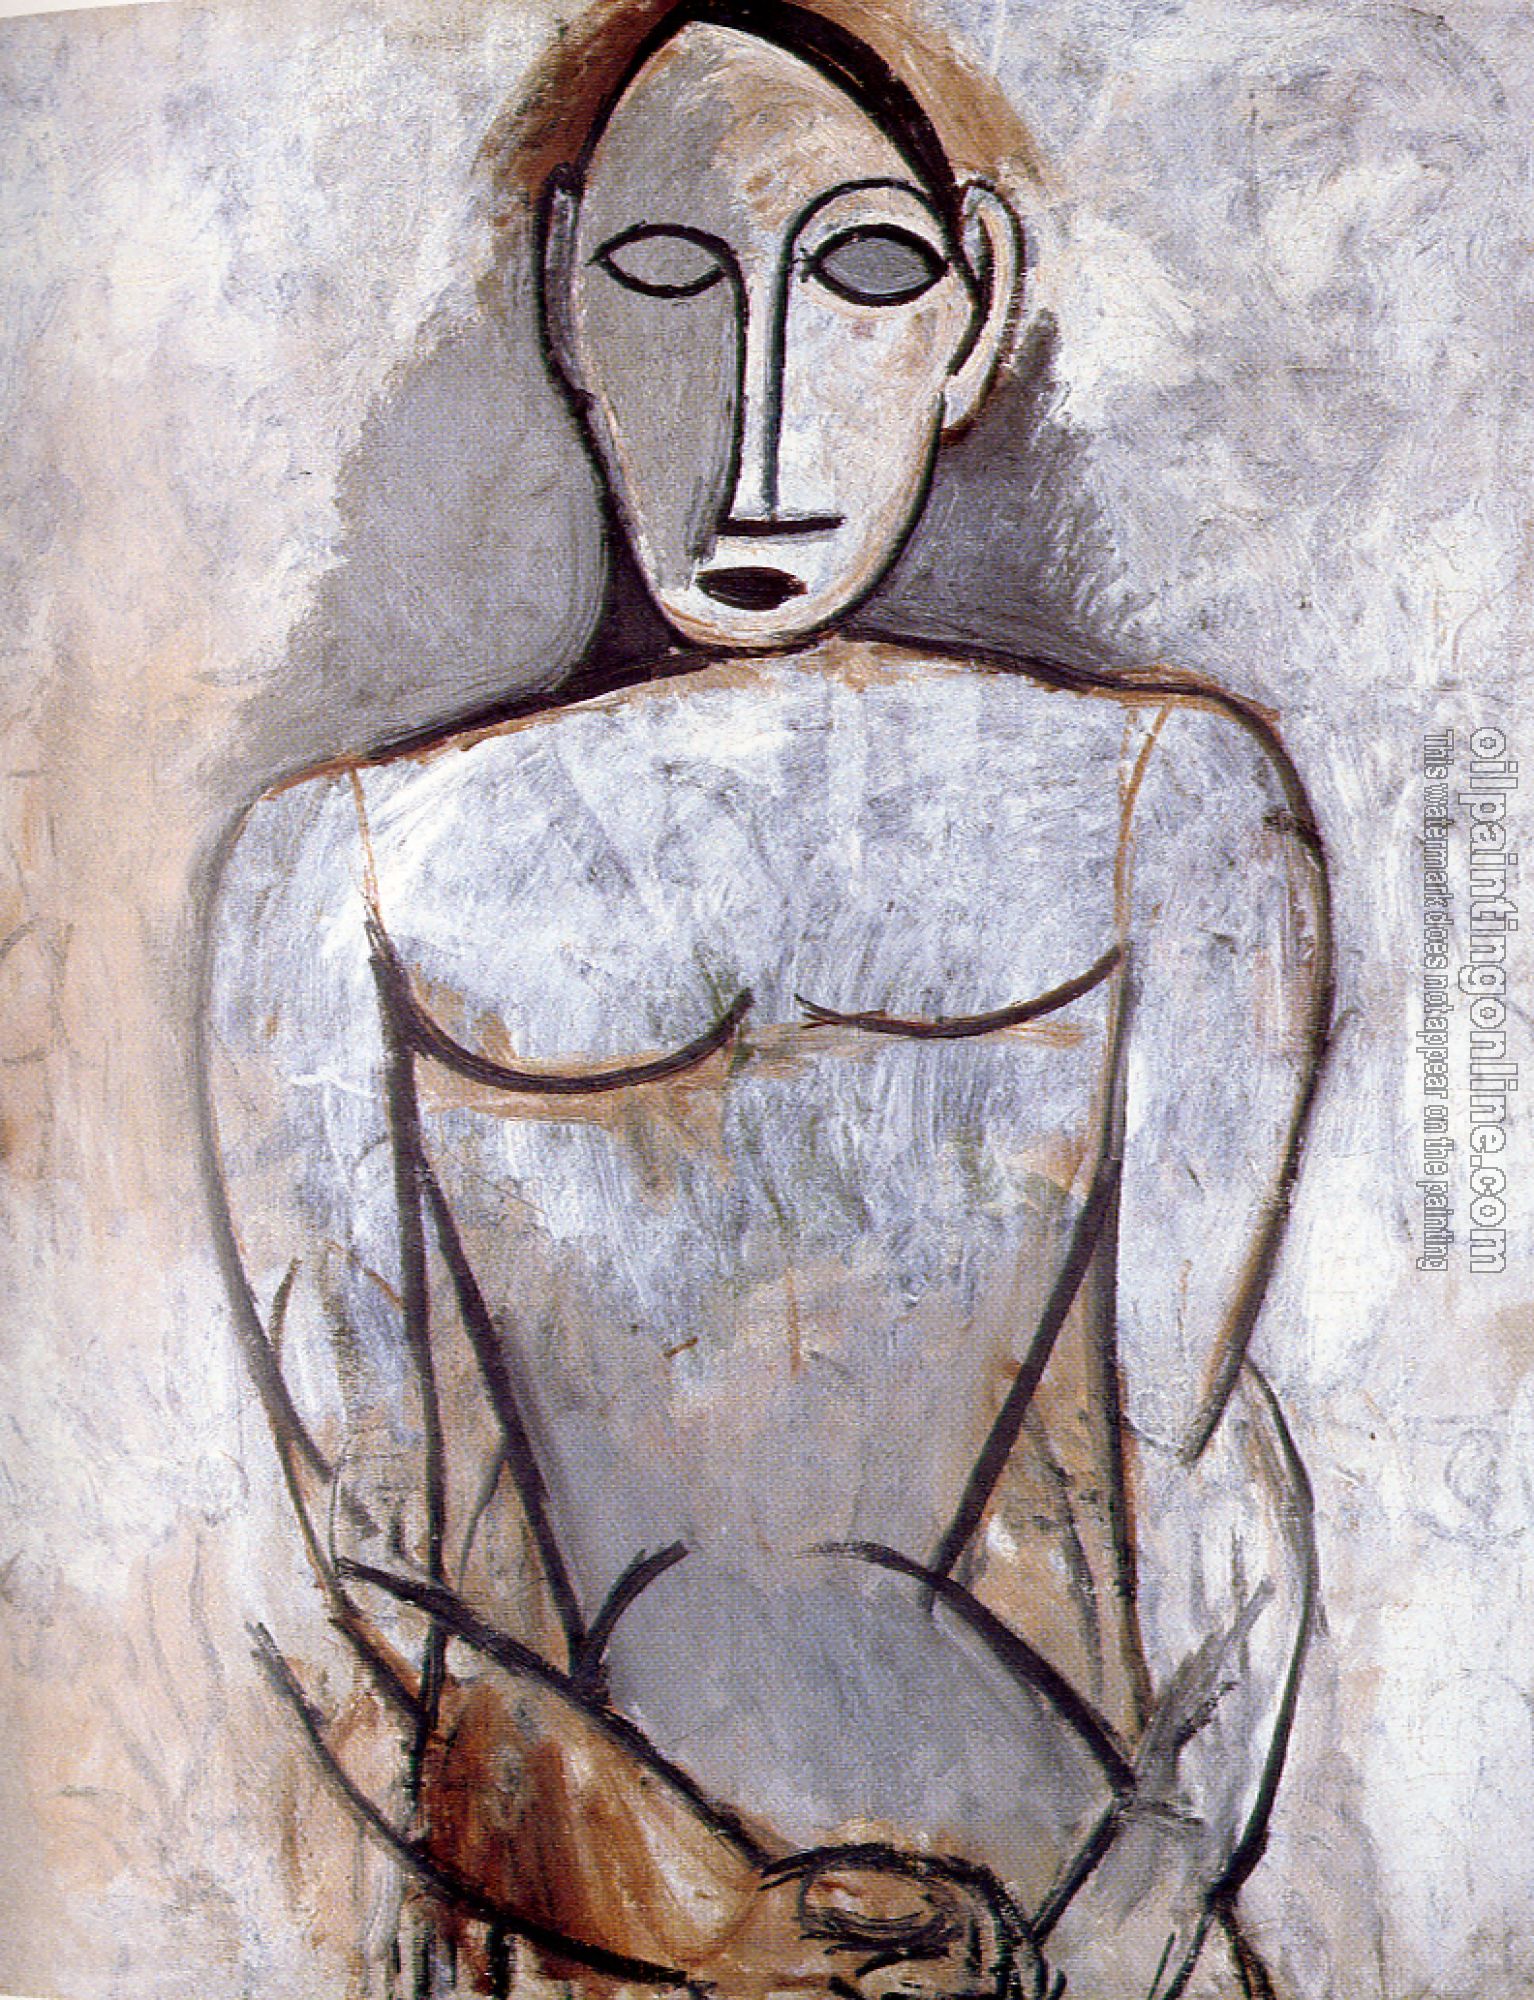 Picasso, Pablo - bust of a woman with clasped hands